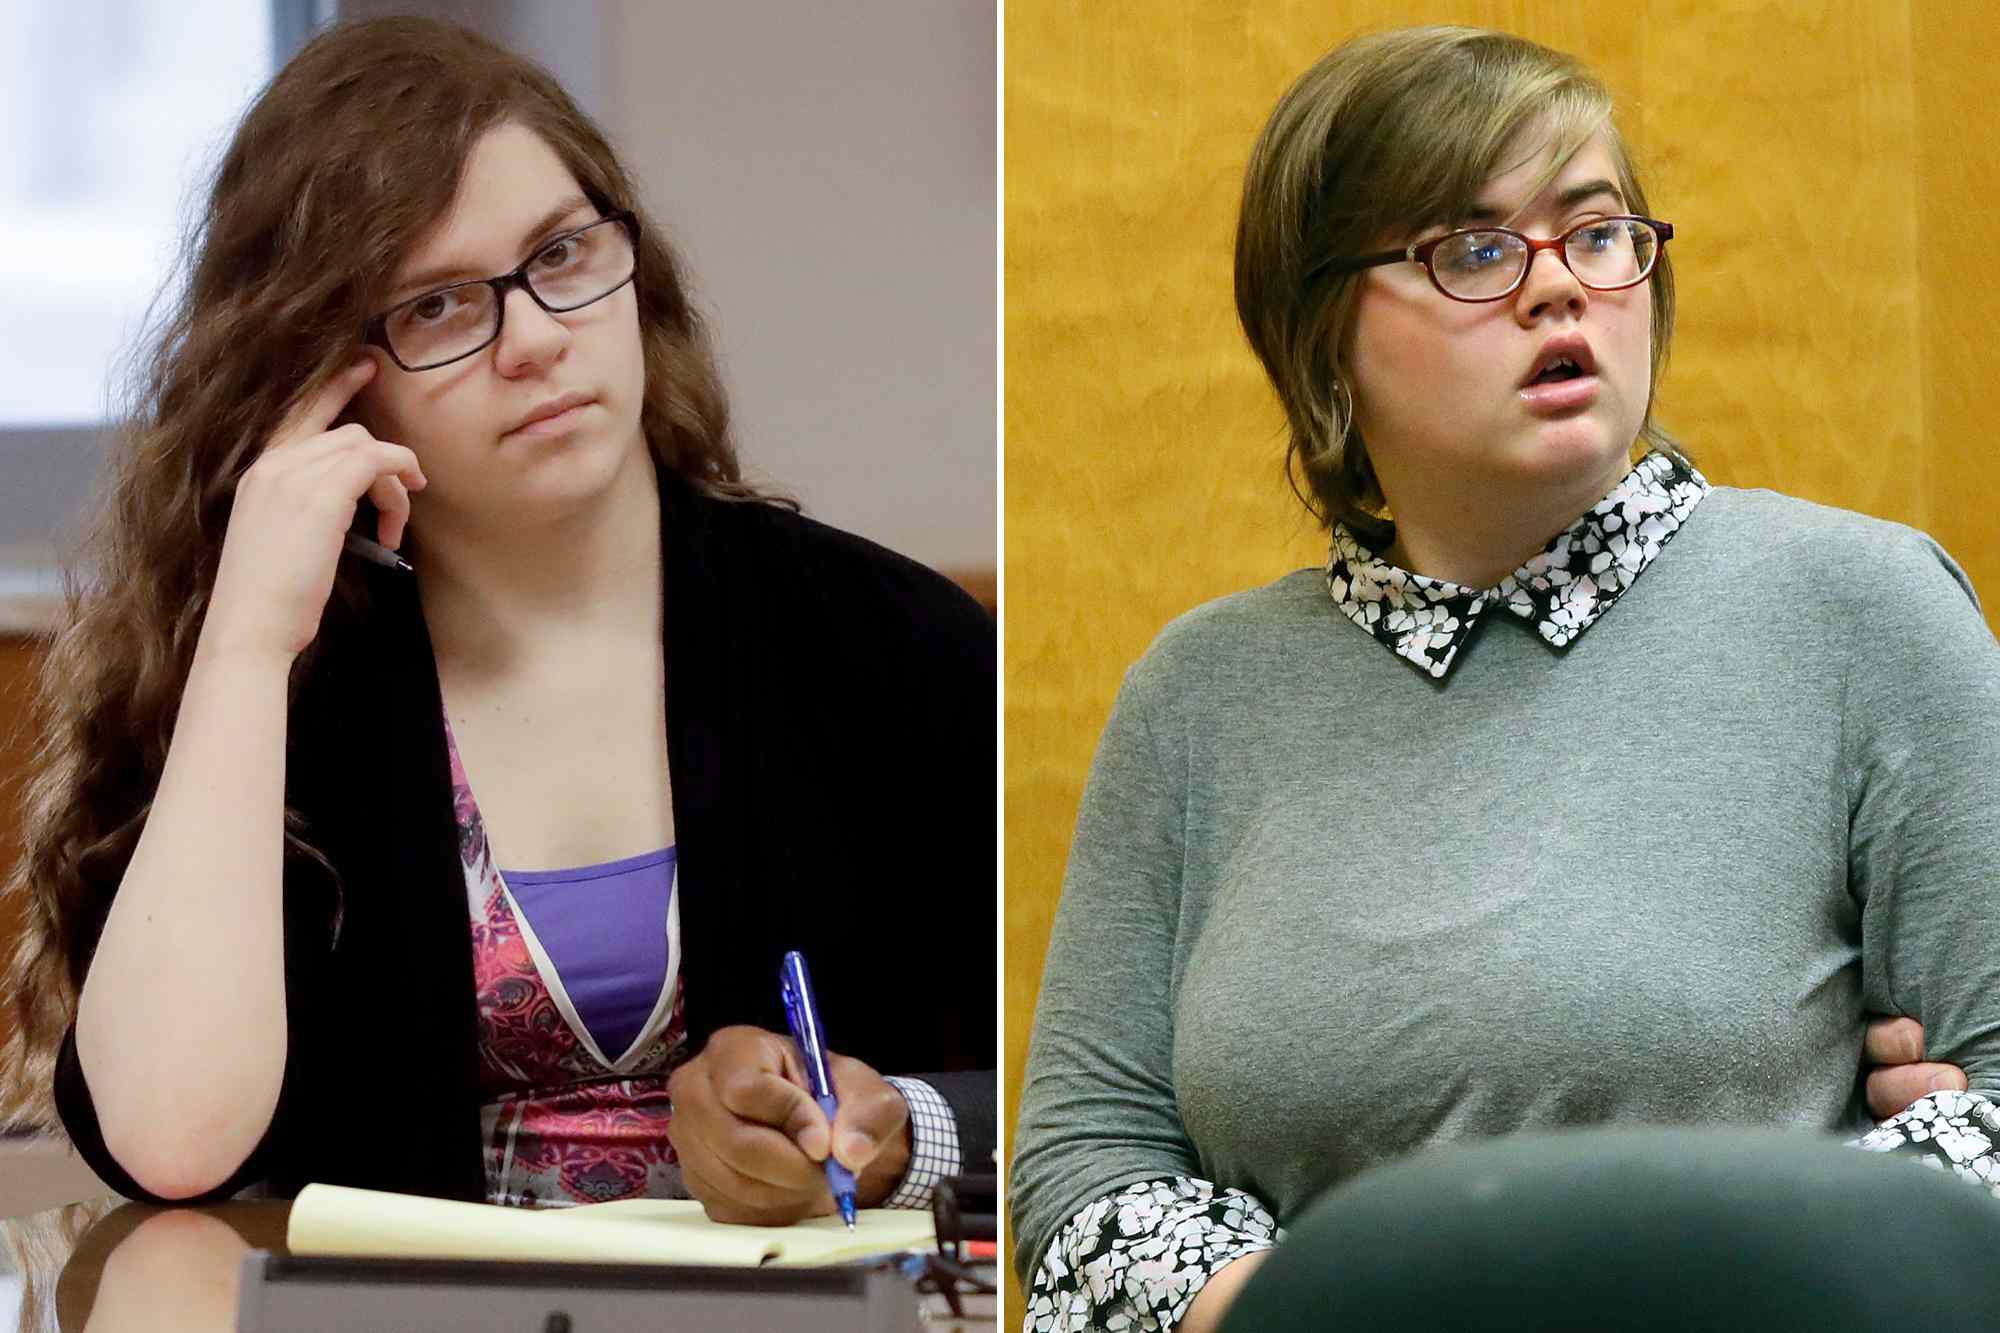 Slender Man Stabbing: Where Are Anissa Weier and Morgan Geyser 10 Years After Attack?